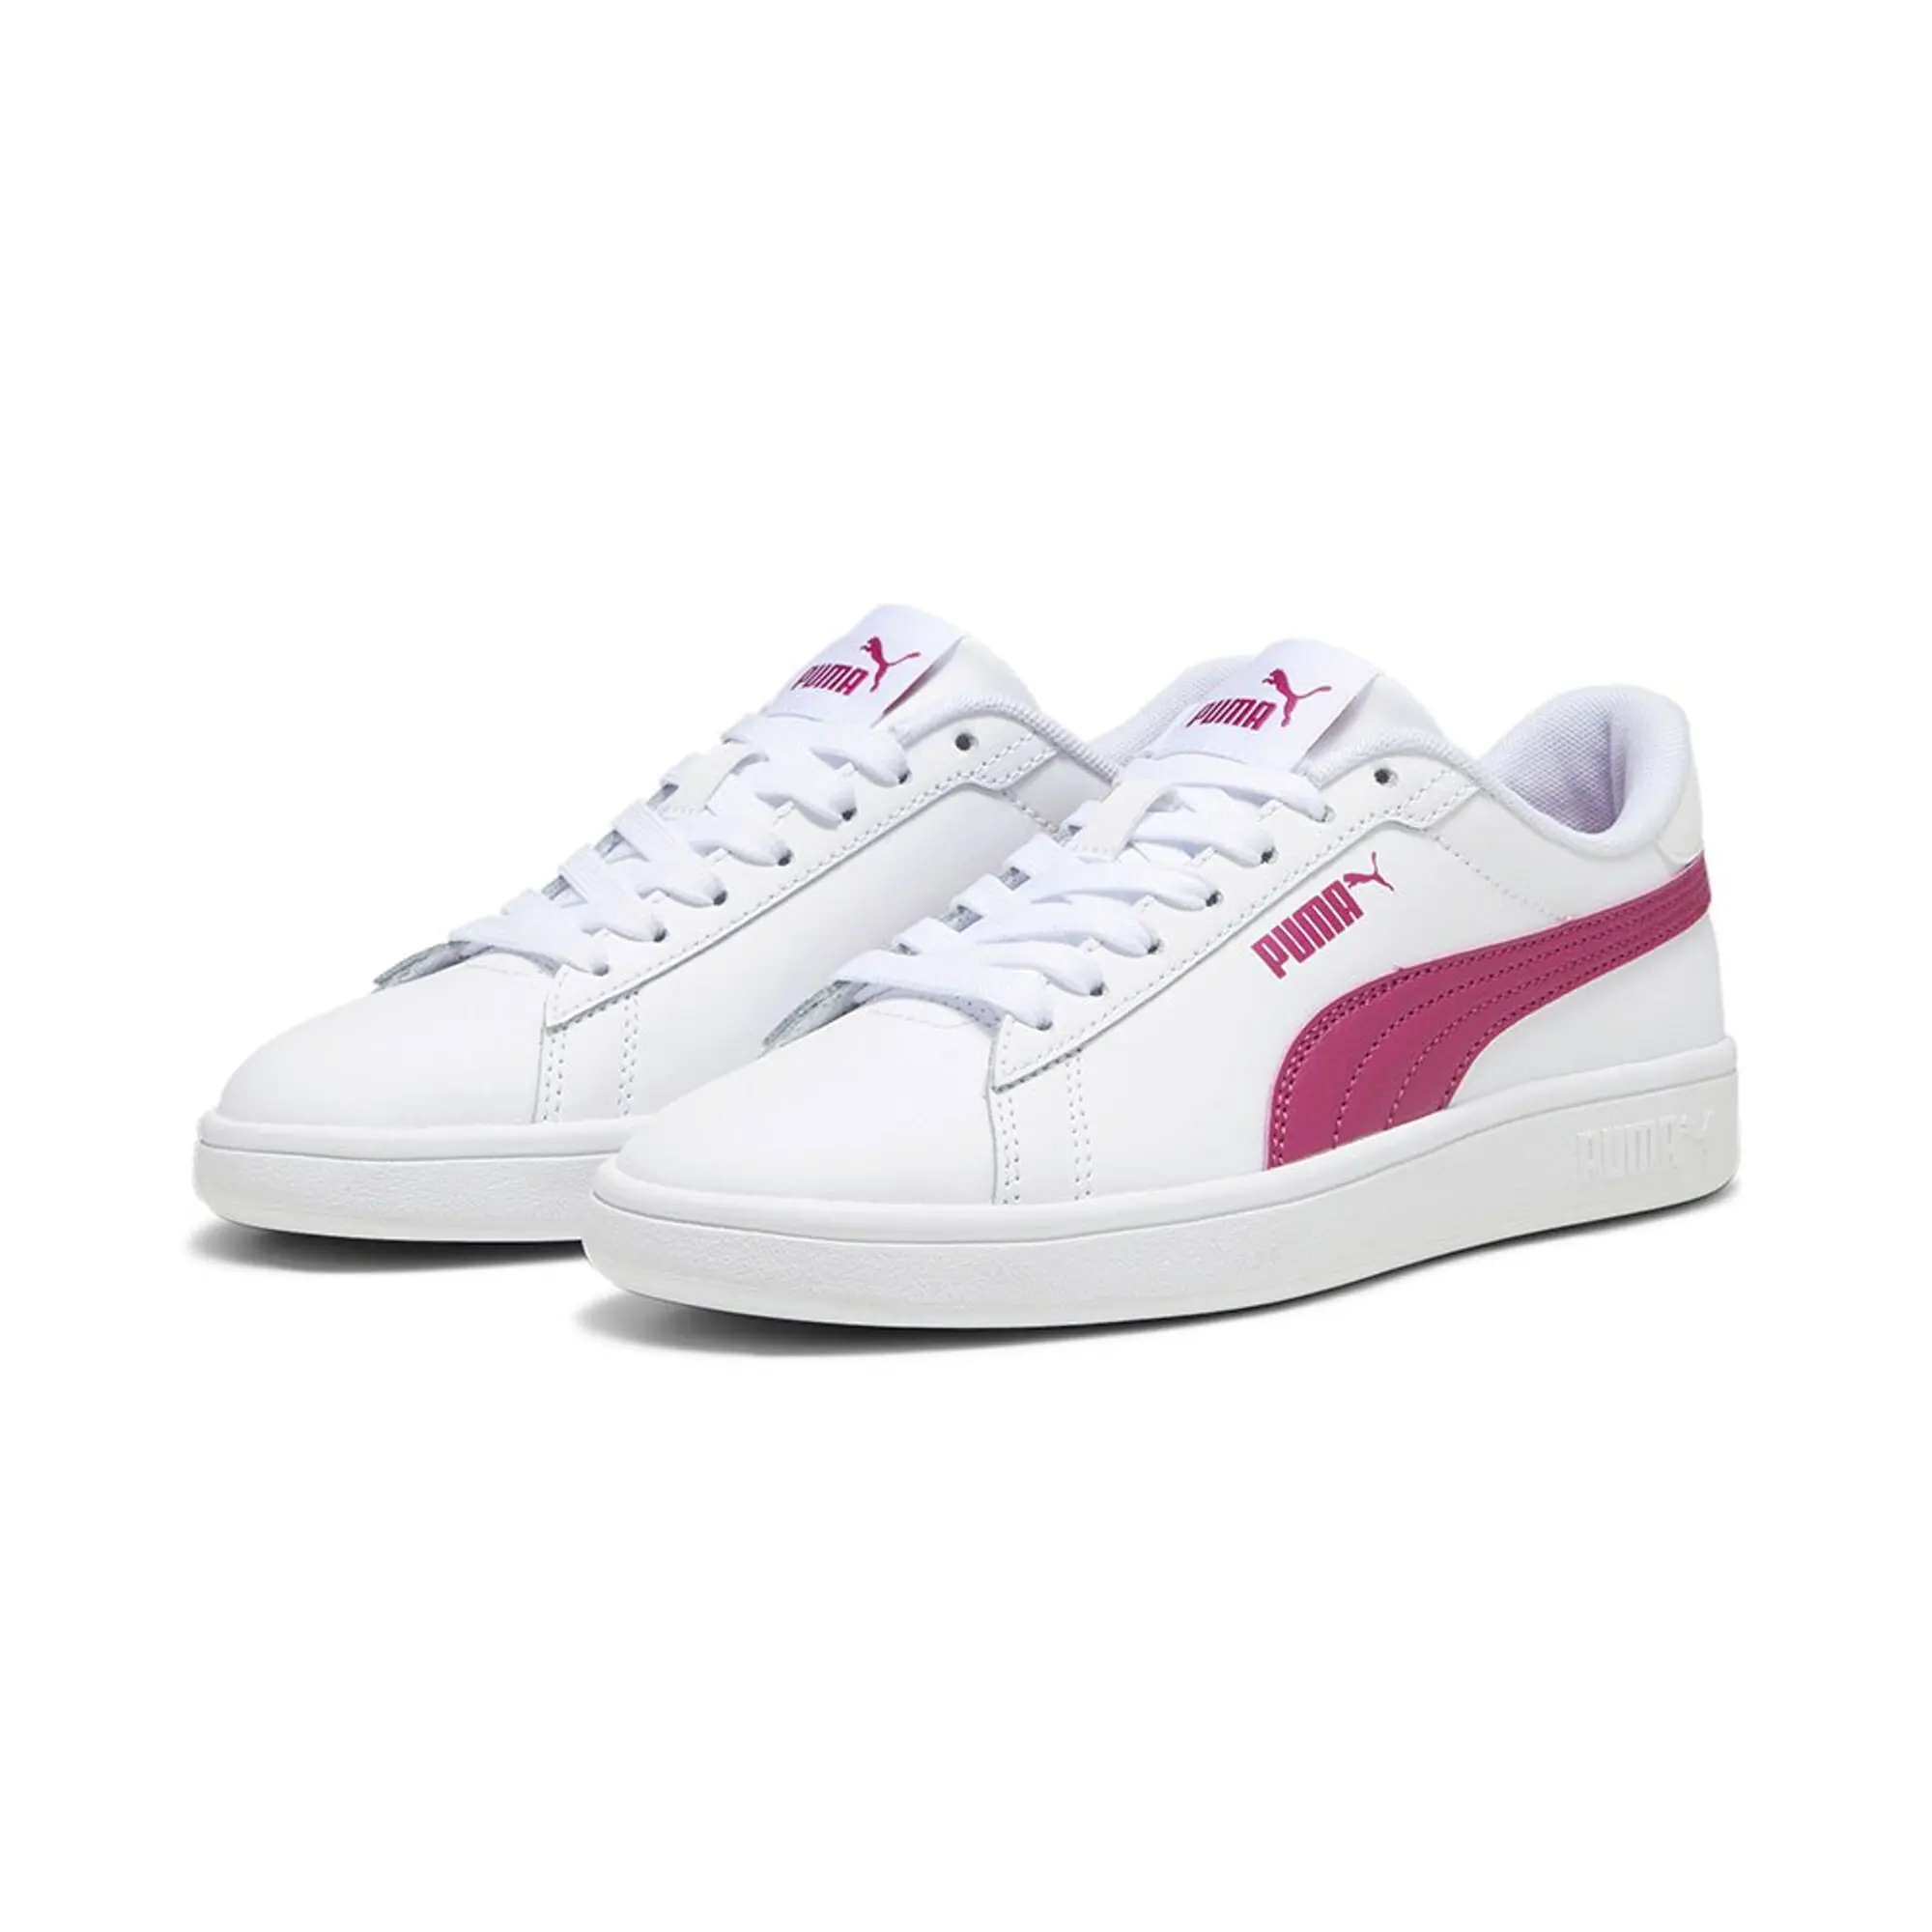 PUMA Smash 3.0 Leather Sneakers Youth, White/Pinktastic | 392031_10